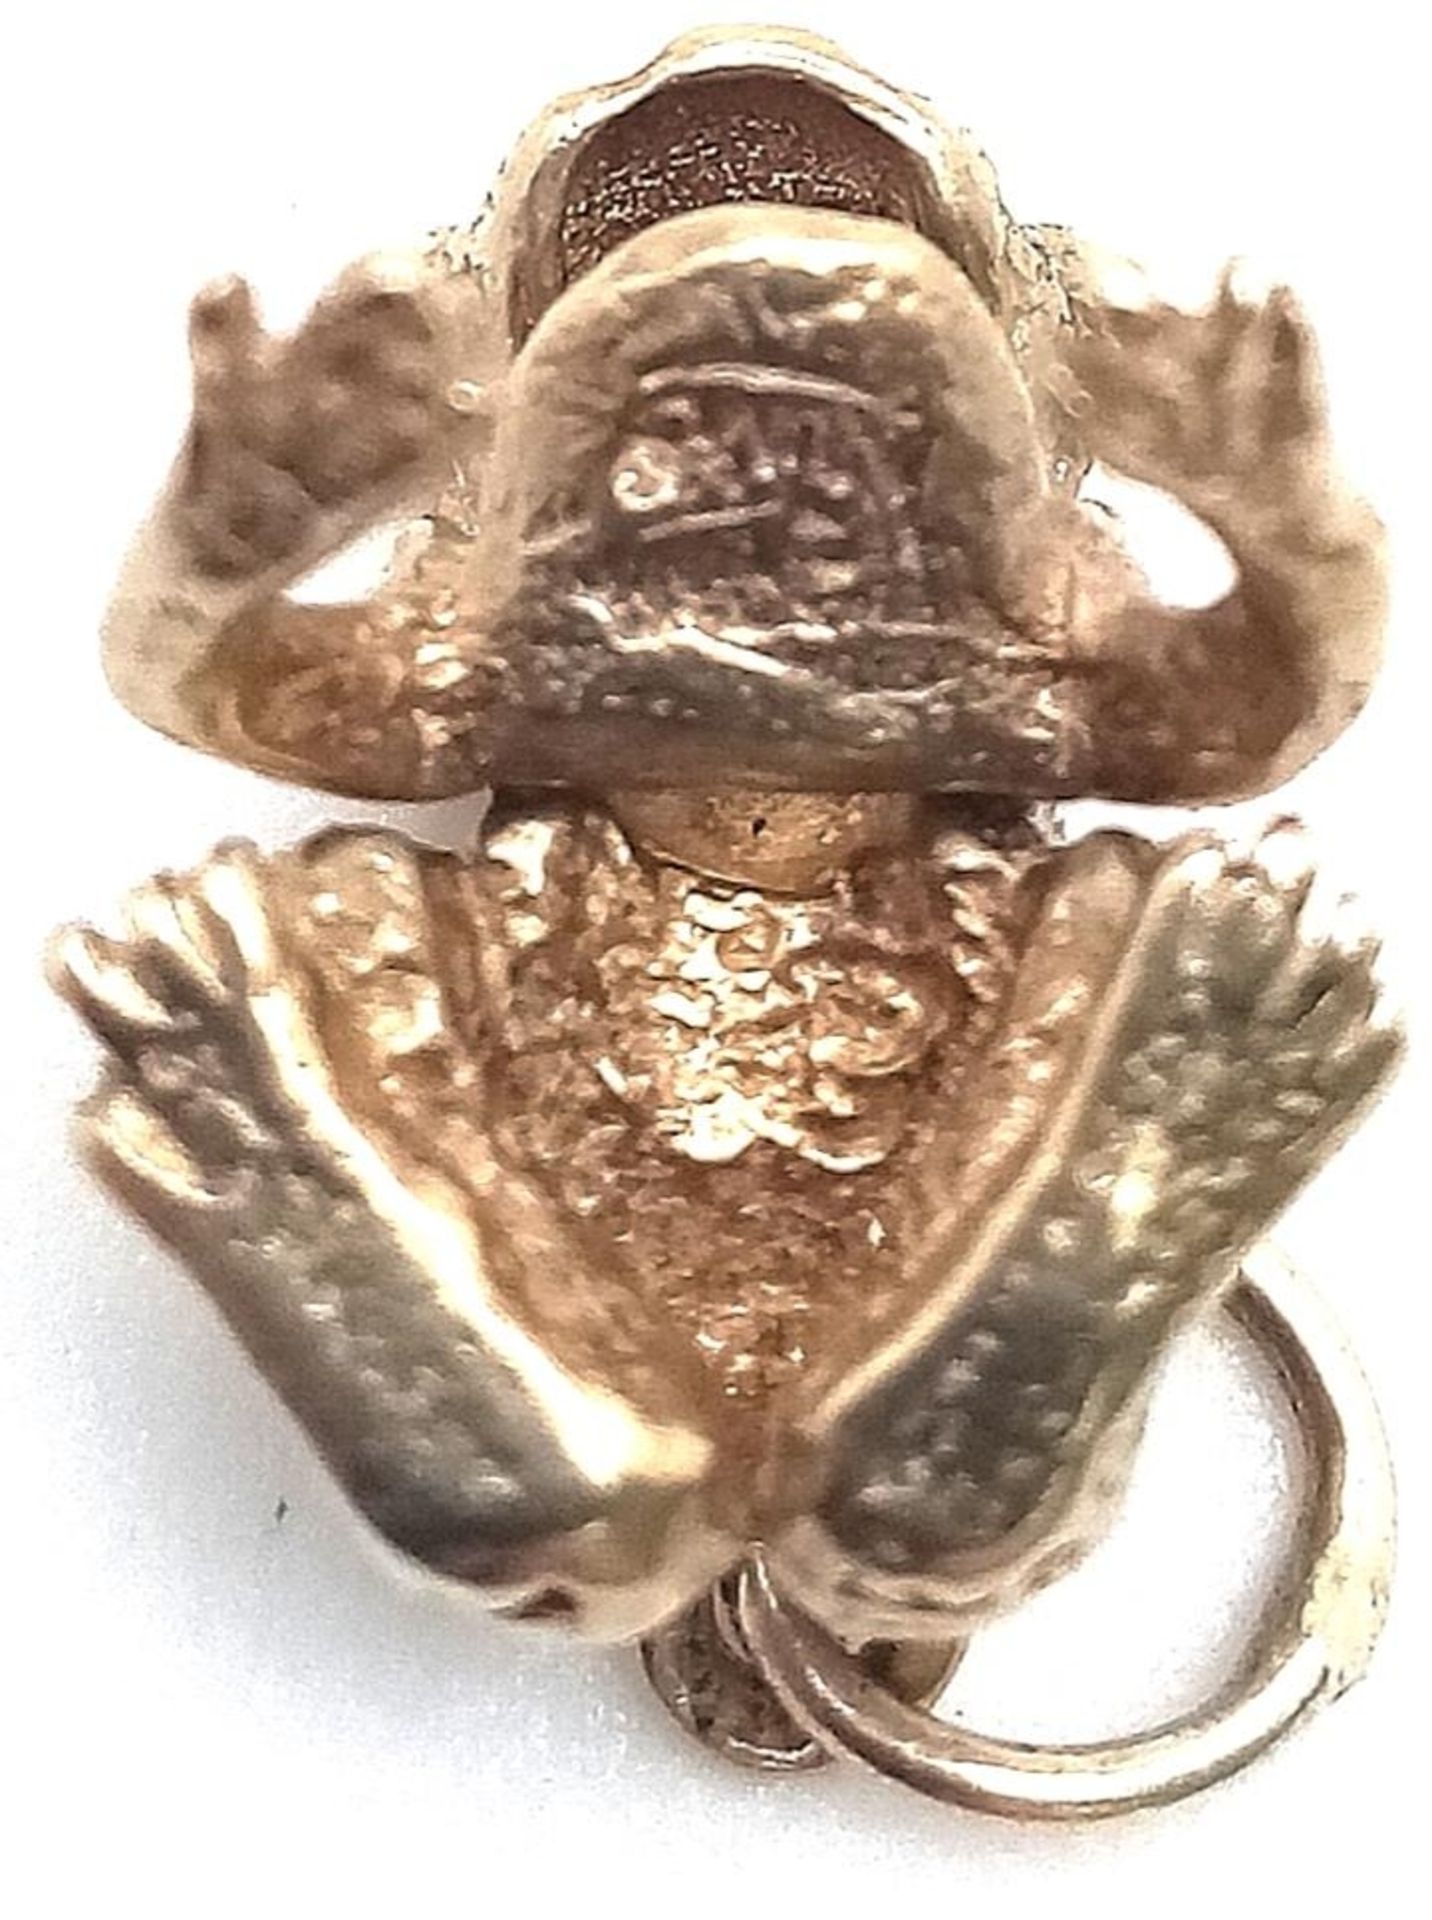 A 9K YELLOW GOLD FROG CHARM WITH GREEN EYES AND MOVING FROG LEGS AND MOUTH. 19mm length, 2.6g - Bild 2 aus 4